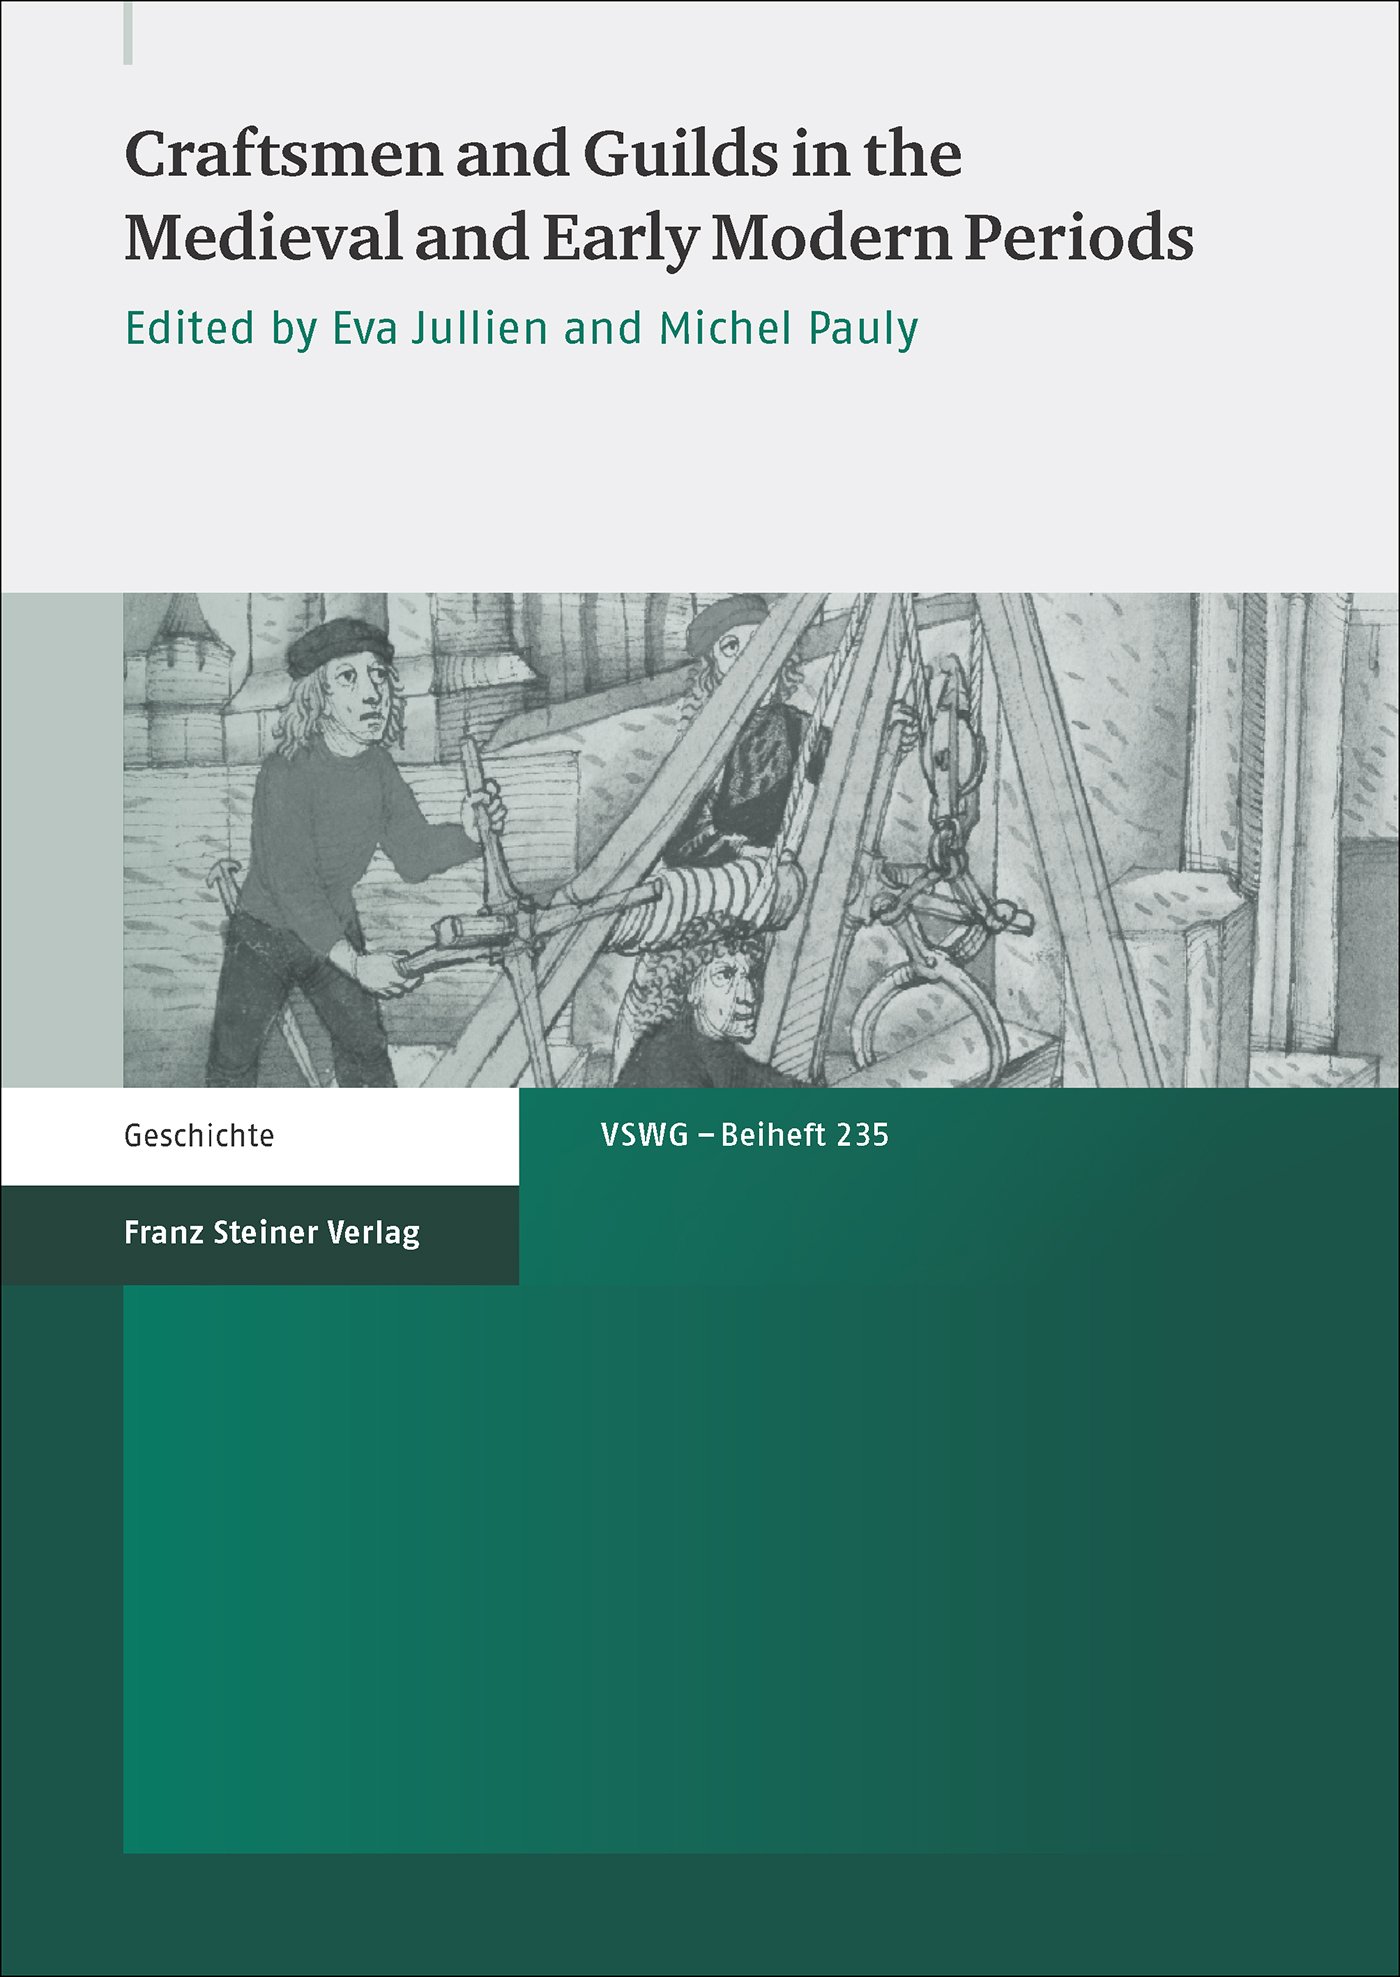 Craftsmen and Guilds in the Medieval and Early Modern Periods